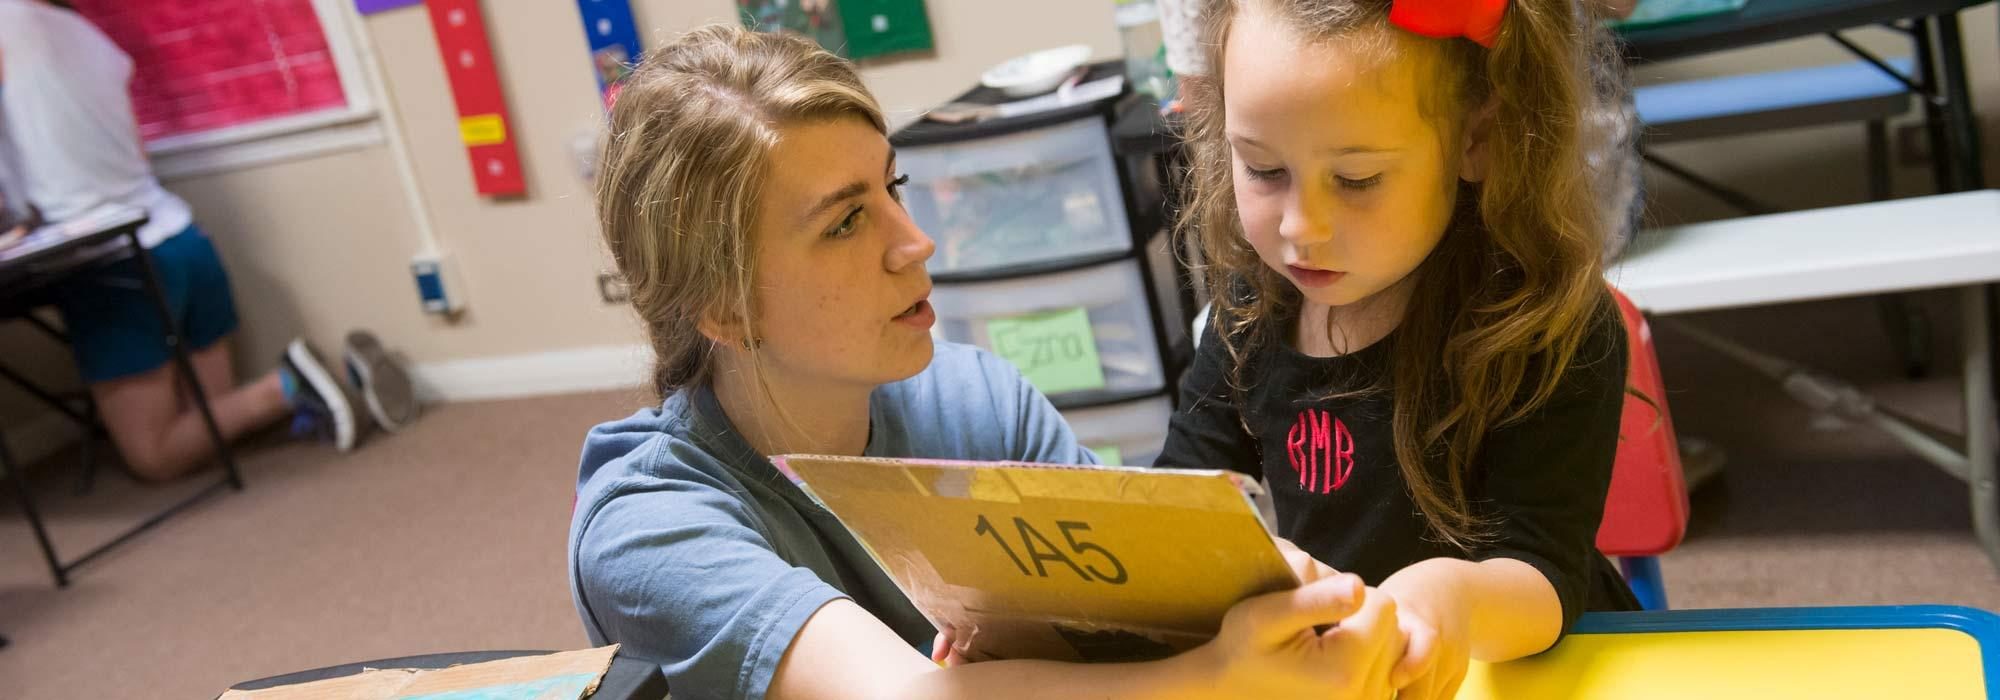 Interdiciplinary Learning student teaching child to read through UMHB education.